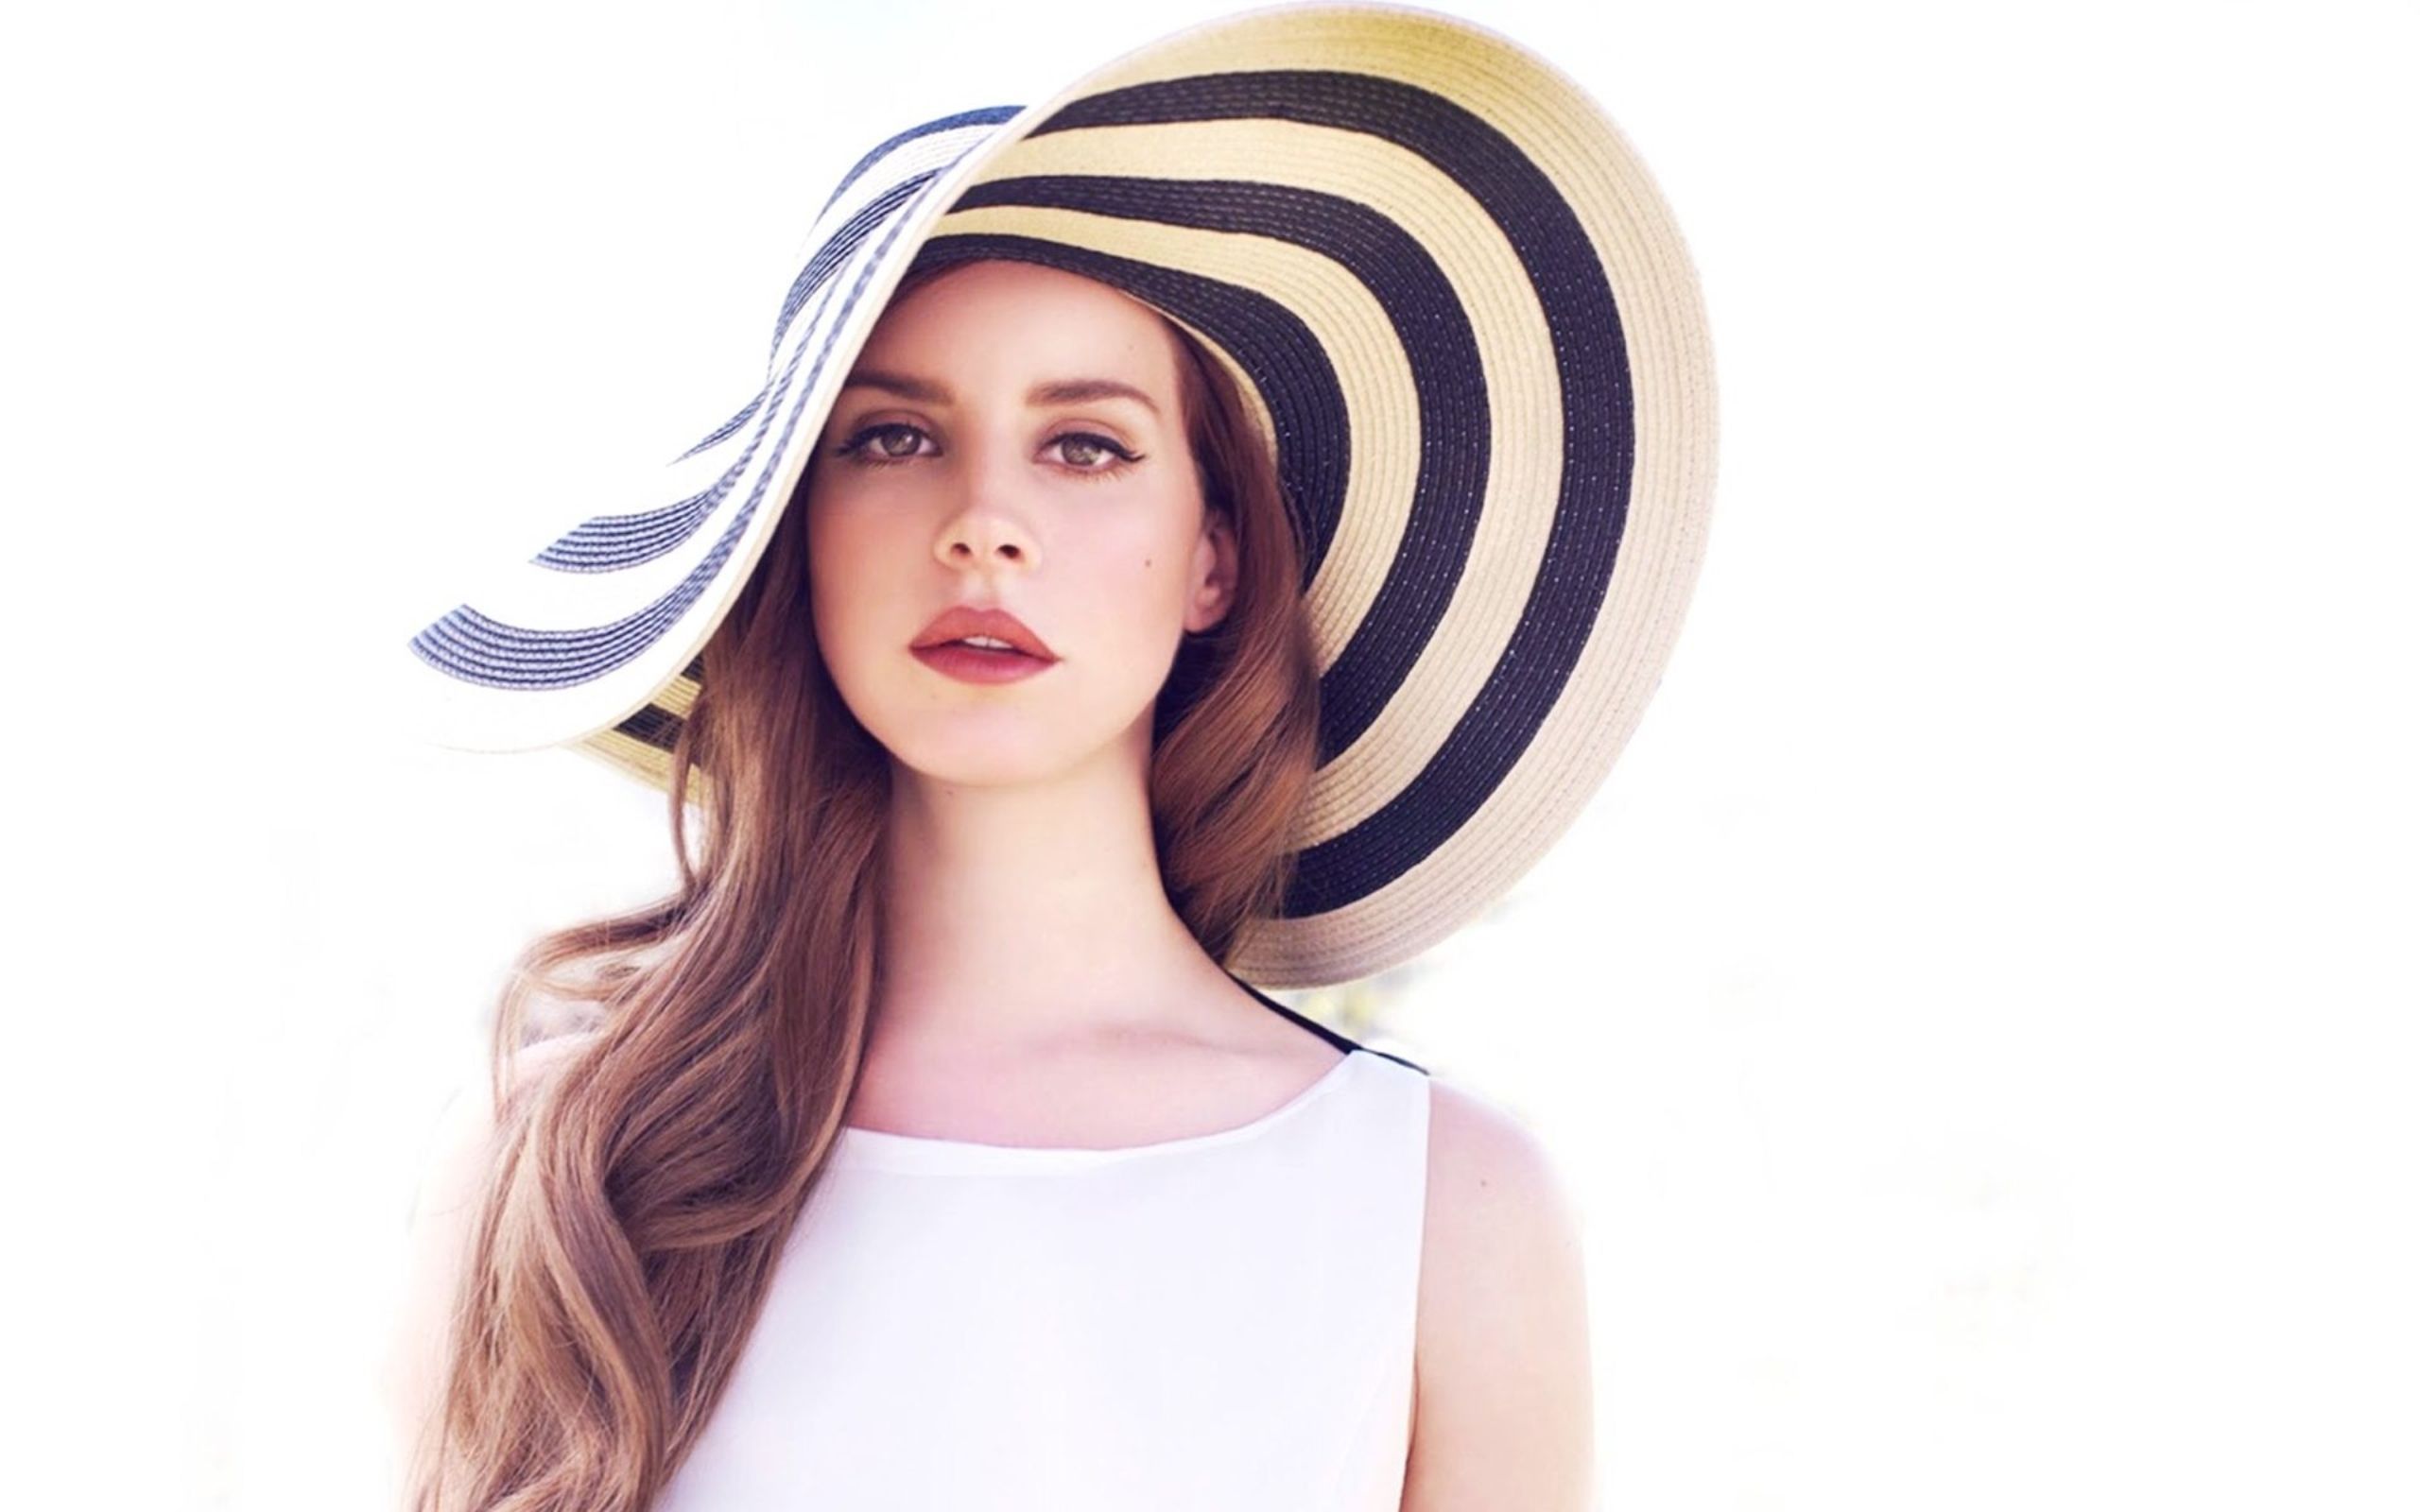 A woman wearing an oversized hat and white dress - Lana Del Rey